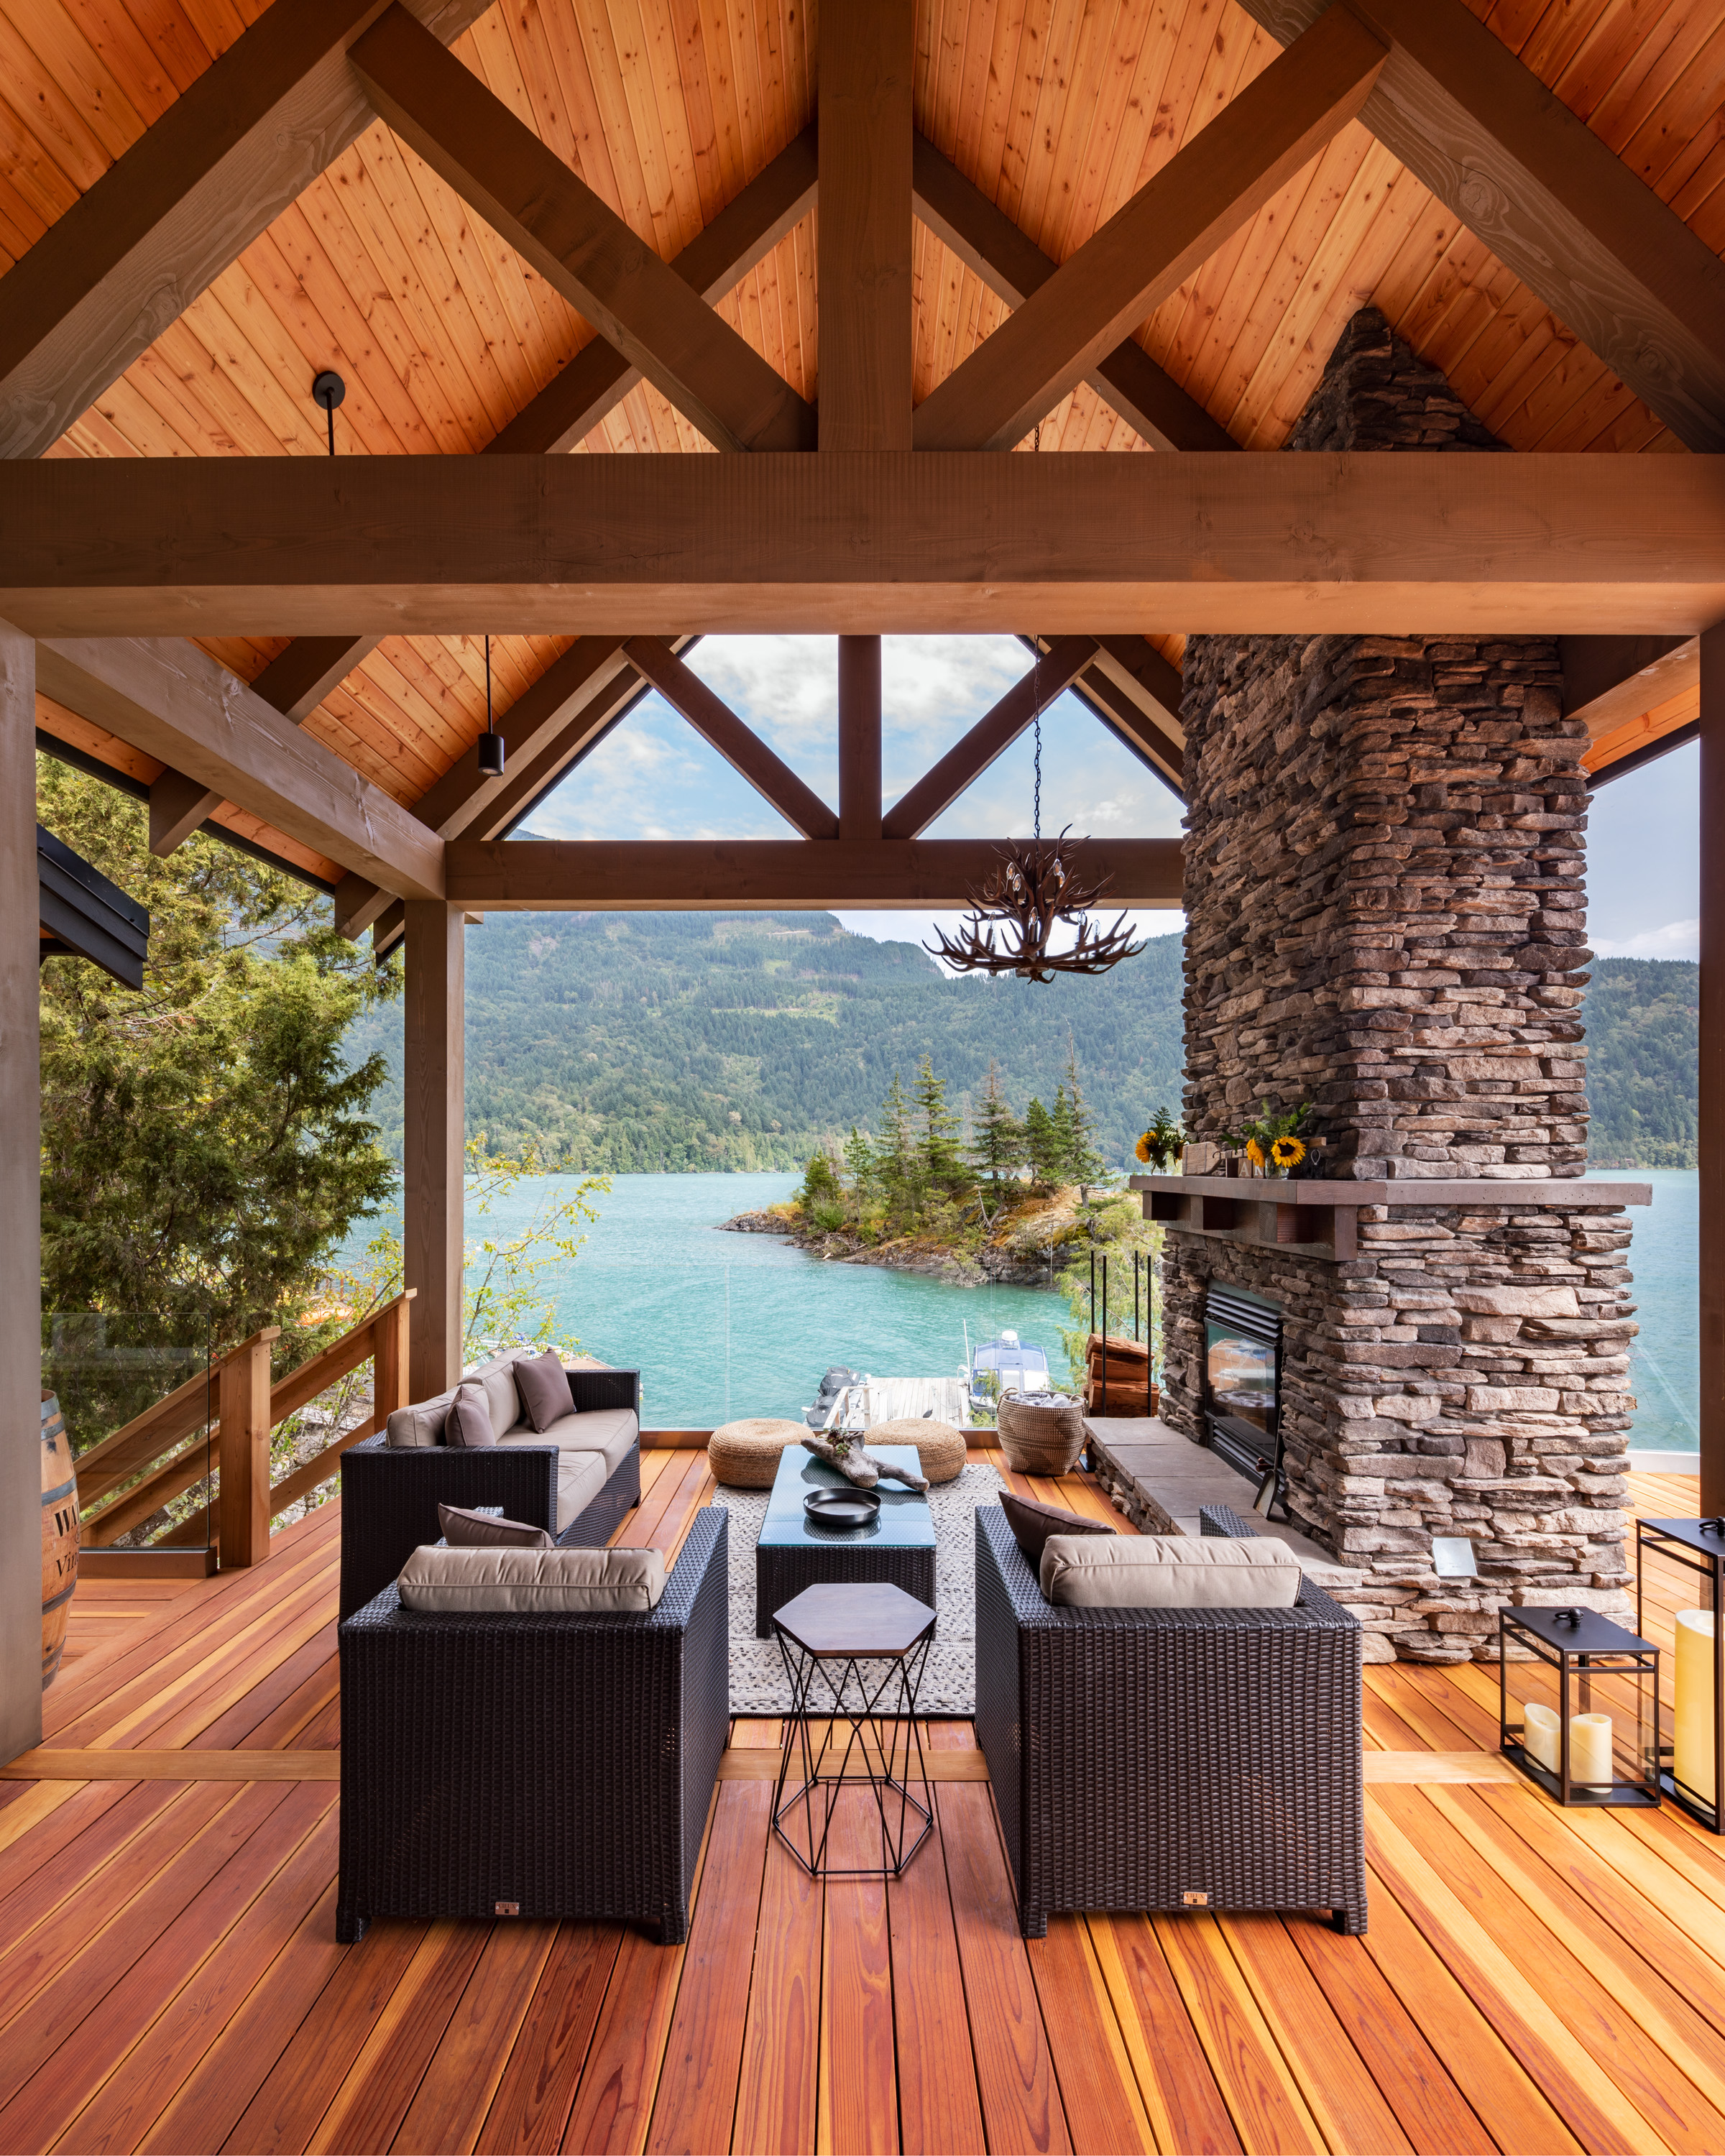 Covered Redwood Deck with Massive Fireplace and Vaulted Timber Ceiling